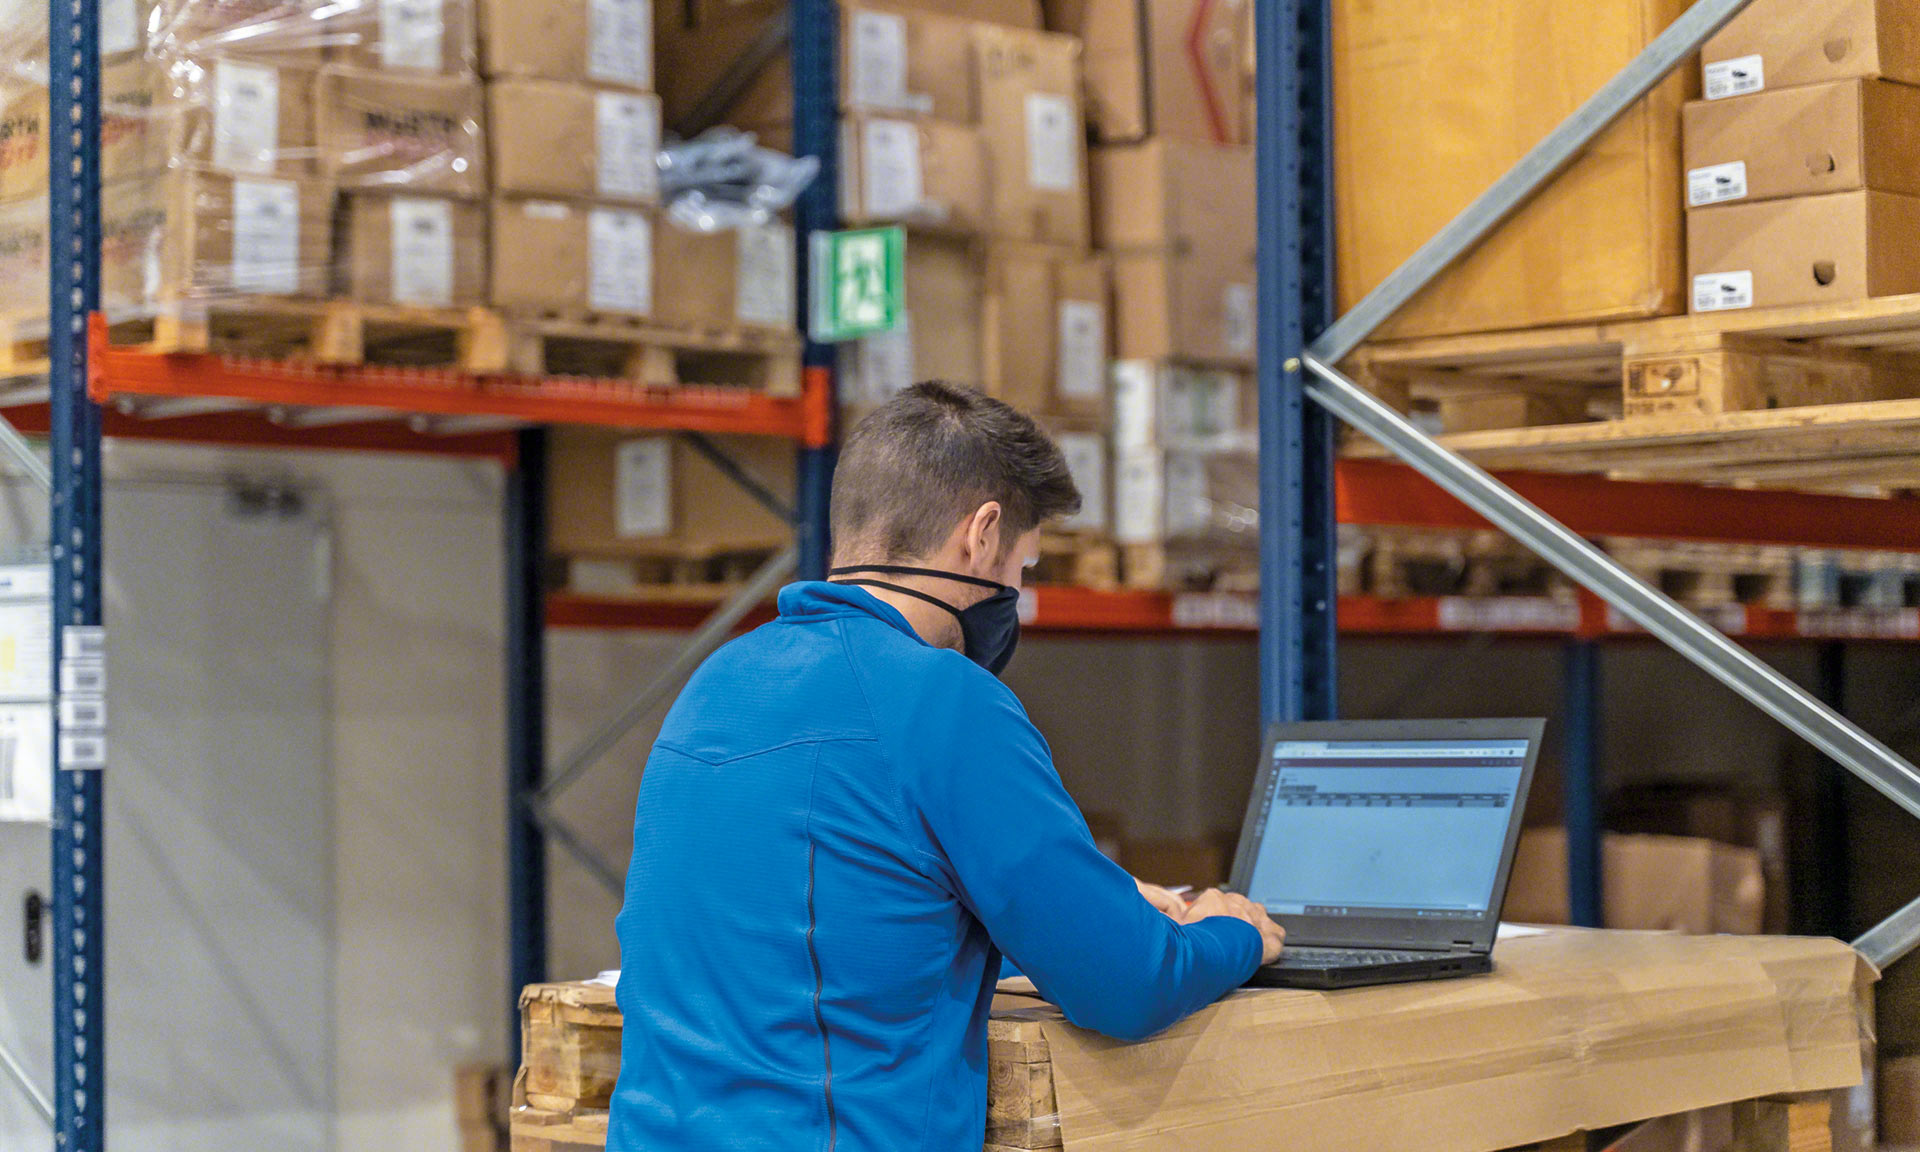 Warehouse inventory management software is a logistics program that records product entries and exits